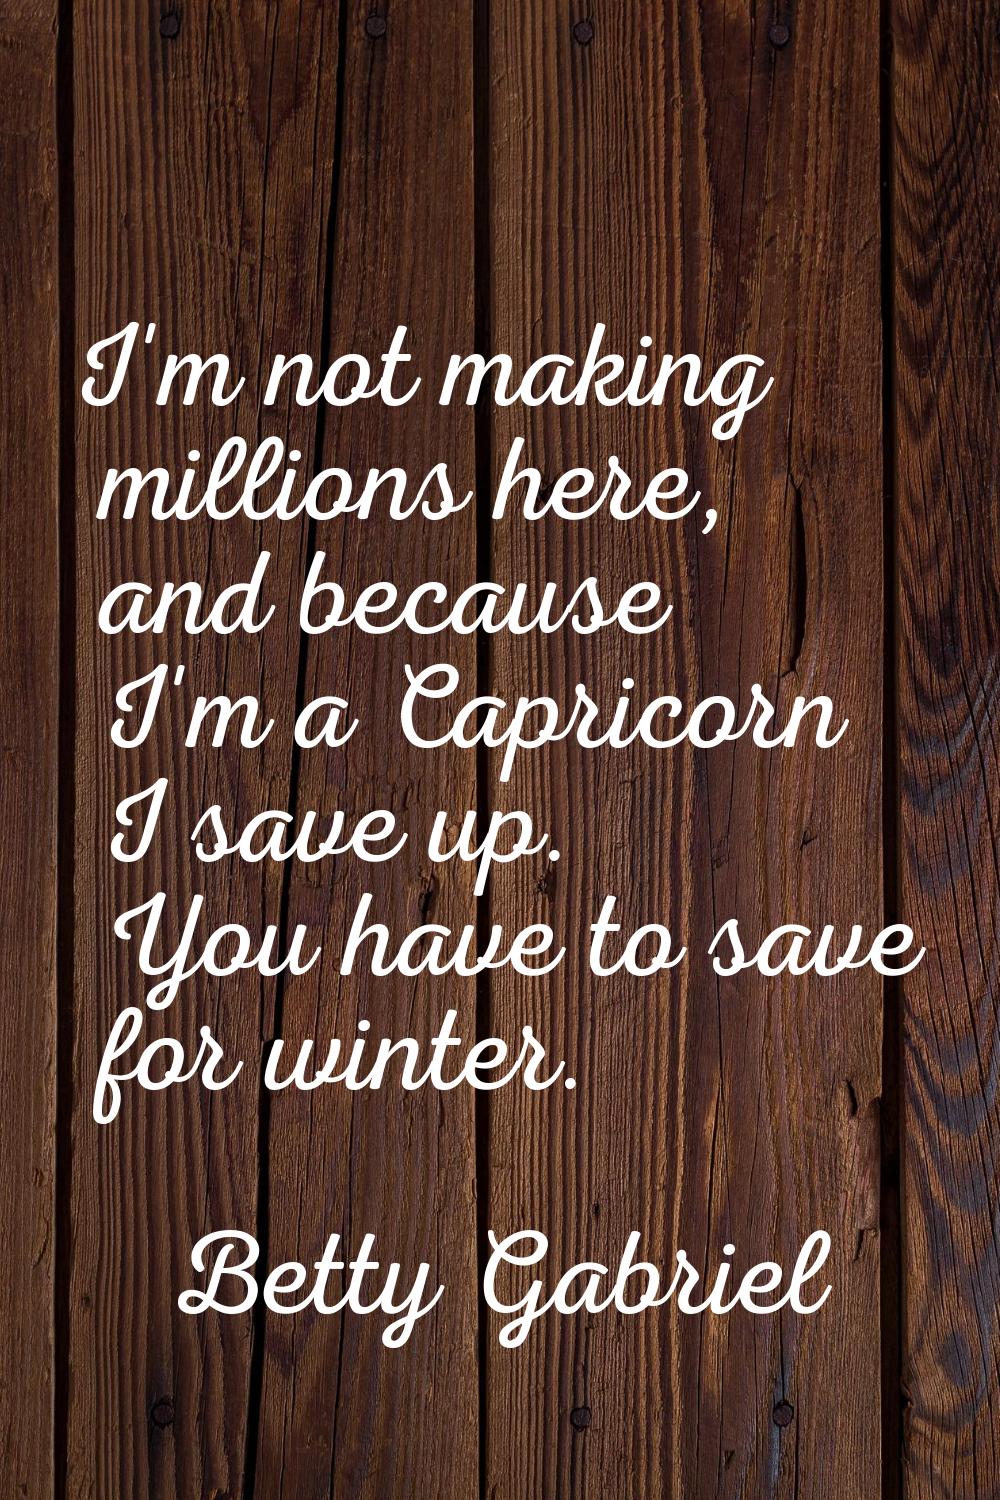 I'm not making millions here, and because I'm a Capricorn I save up. You have to save for winter.